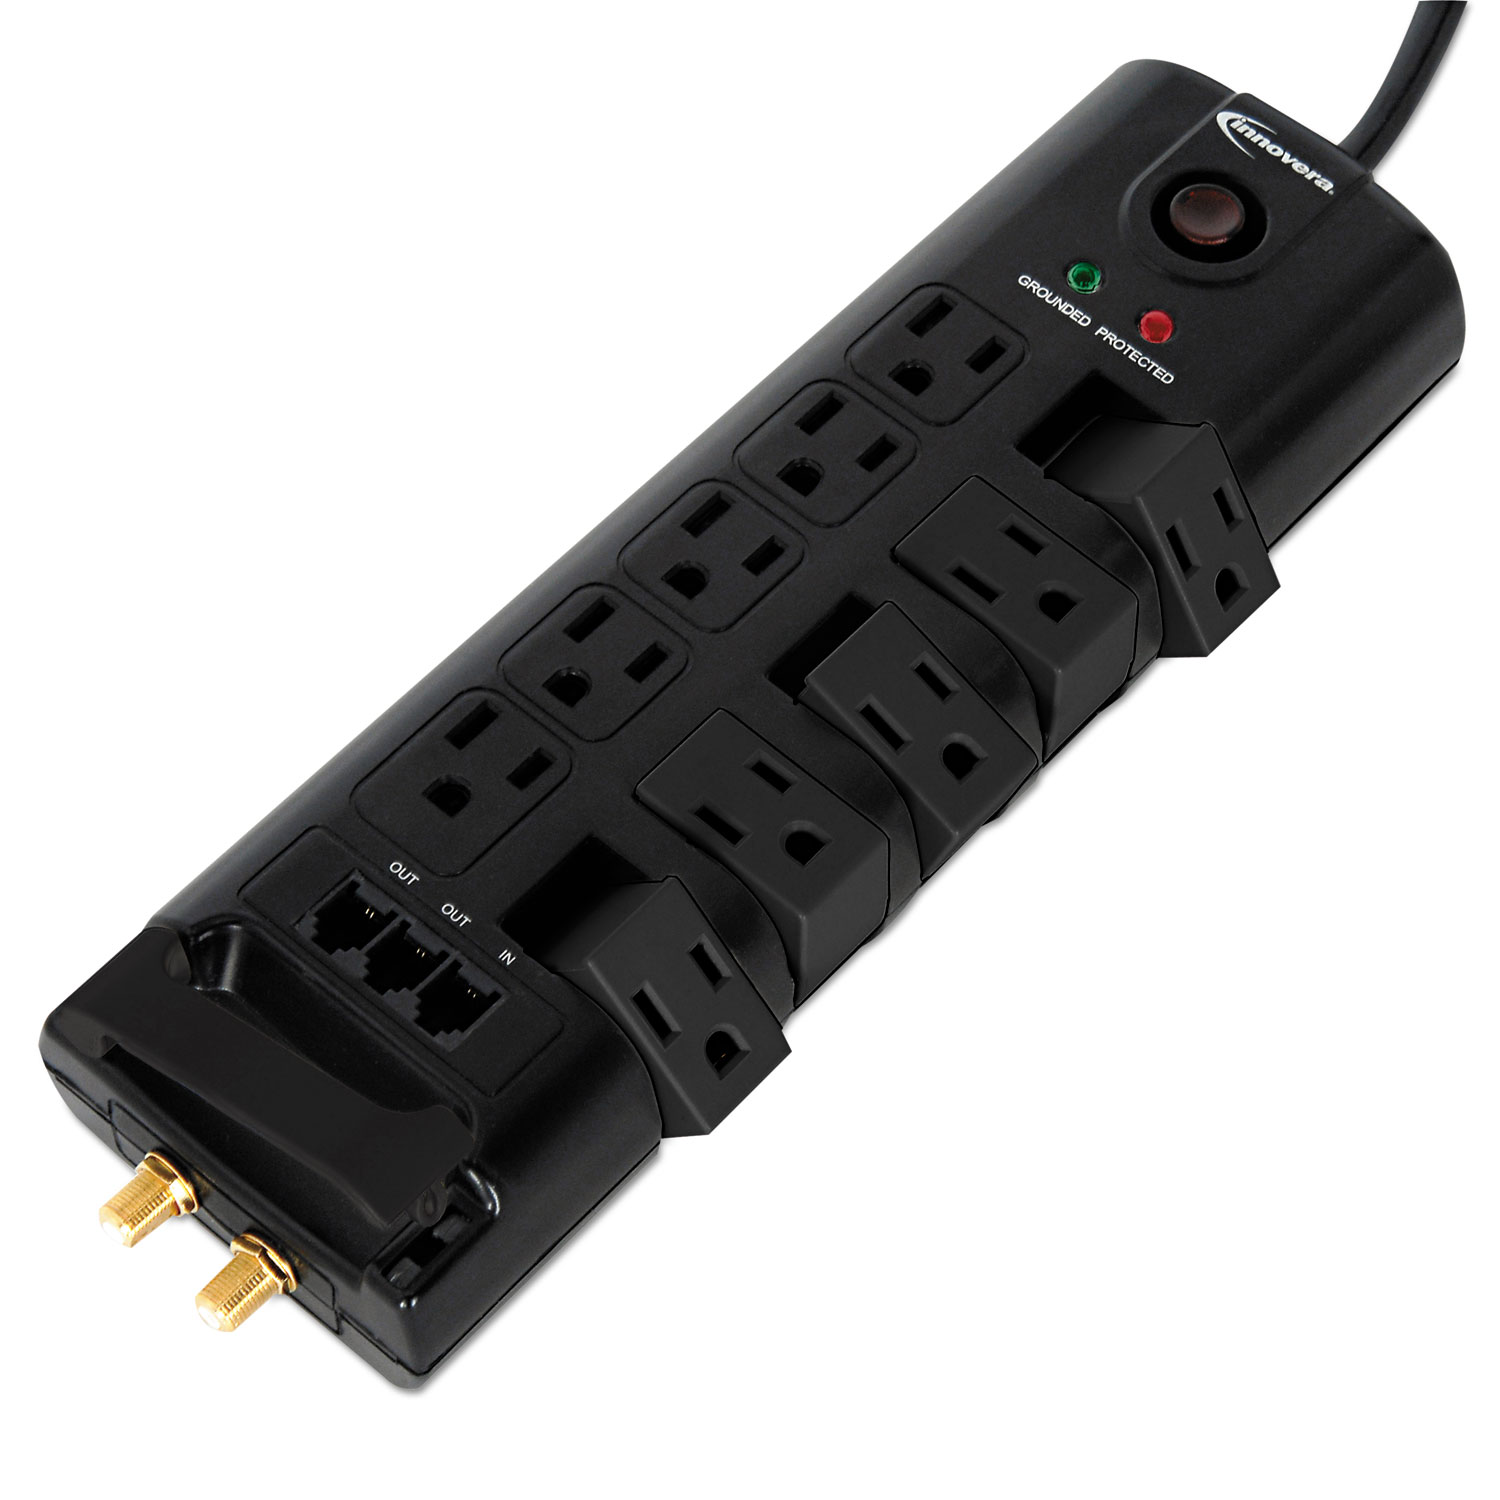  Innovera IVR71657 Surge Protector, 10 Outlets, 6 ft Cord, 2880 Joules, Black (IVR71657) 